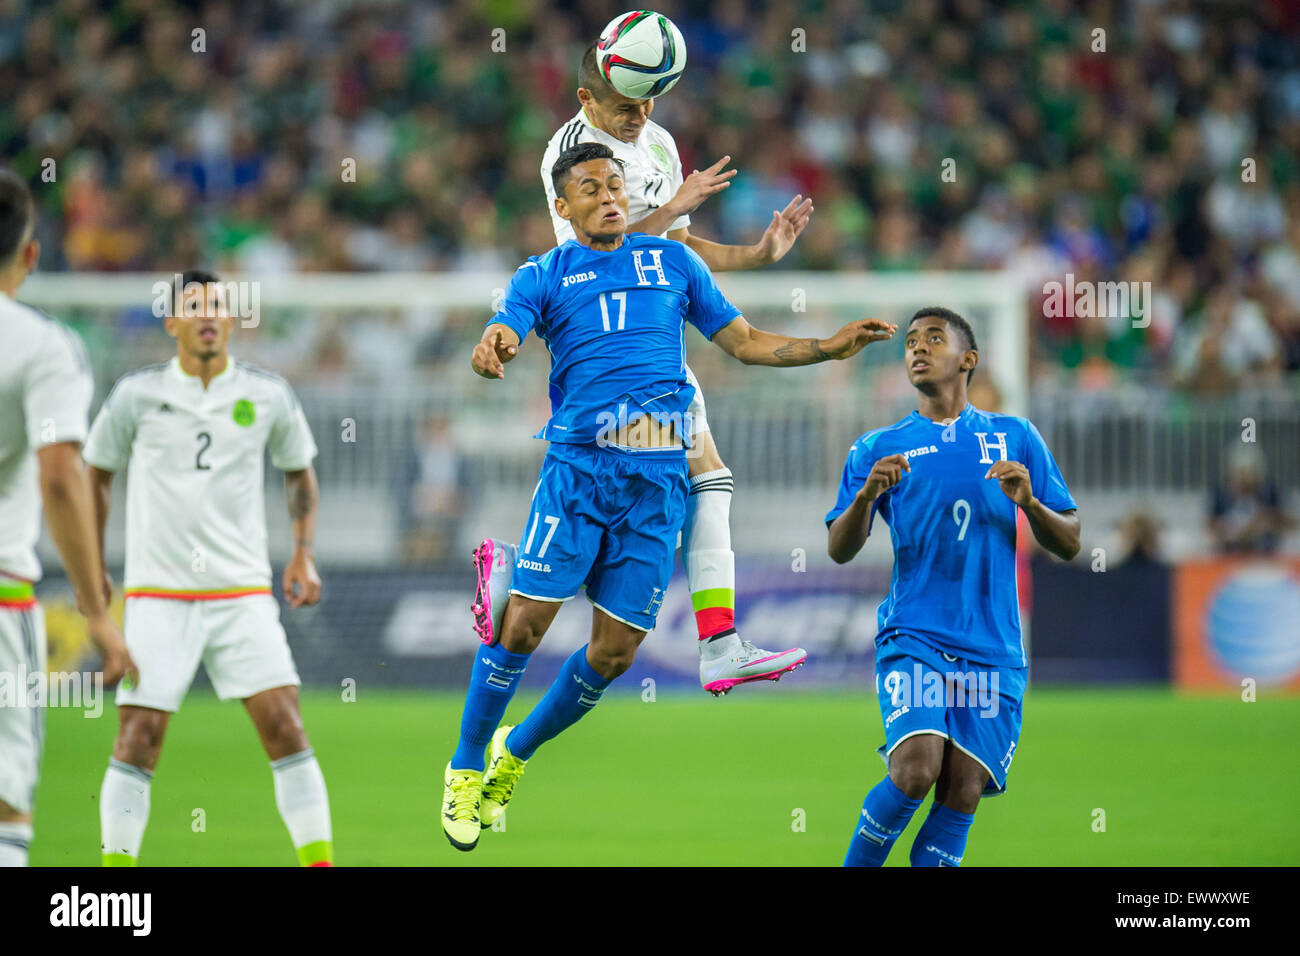 Houston, TX, USA. 1st July, 2015. Honduras midfielder Andy Najar (17) and Mexico defender Paul Aguilar (22) battle for a header during the 1st half of an international soccer match between Honduras and Mexico at NRG Stadium in Houston, TX. Trask Smith/CSM/Alamy Live News Stock Photo